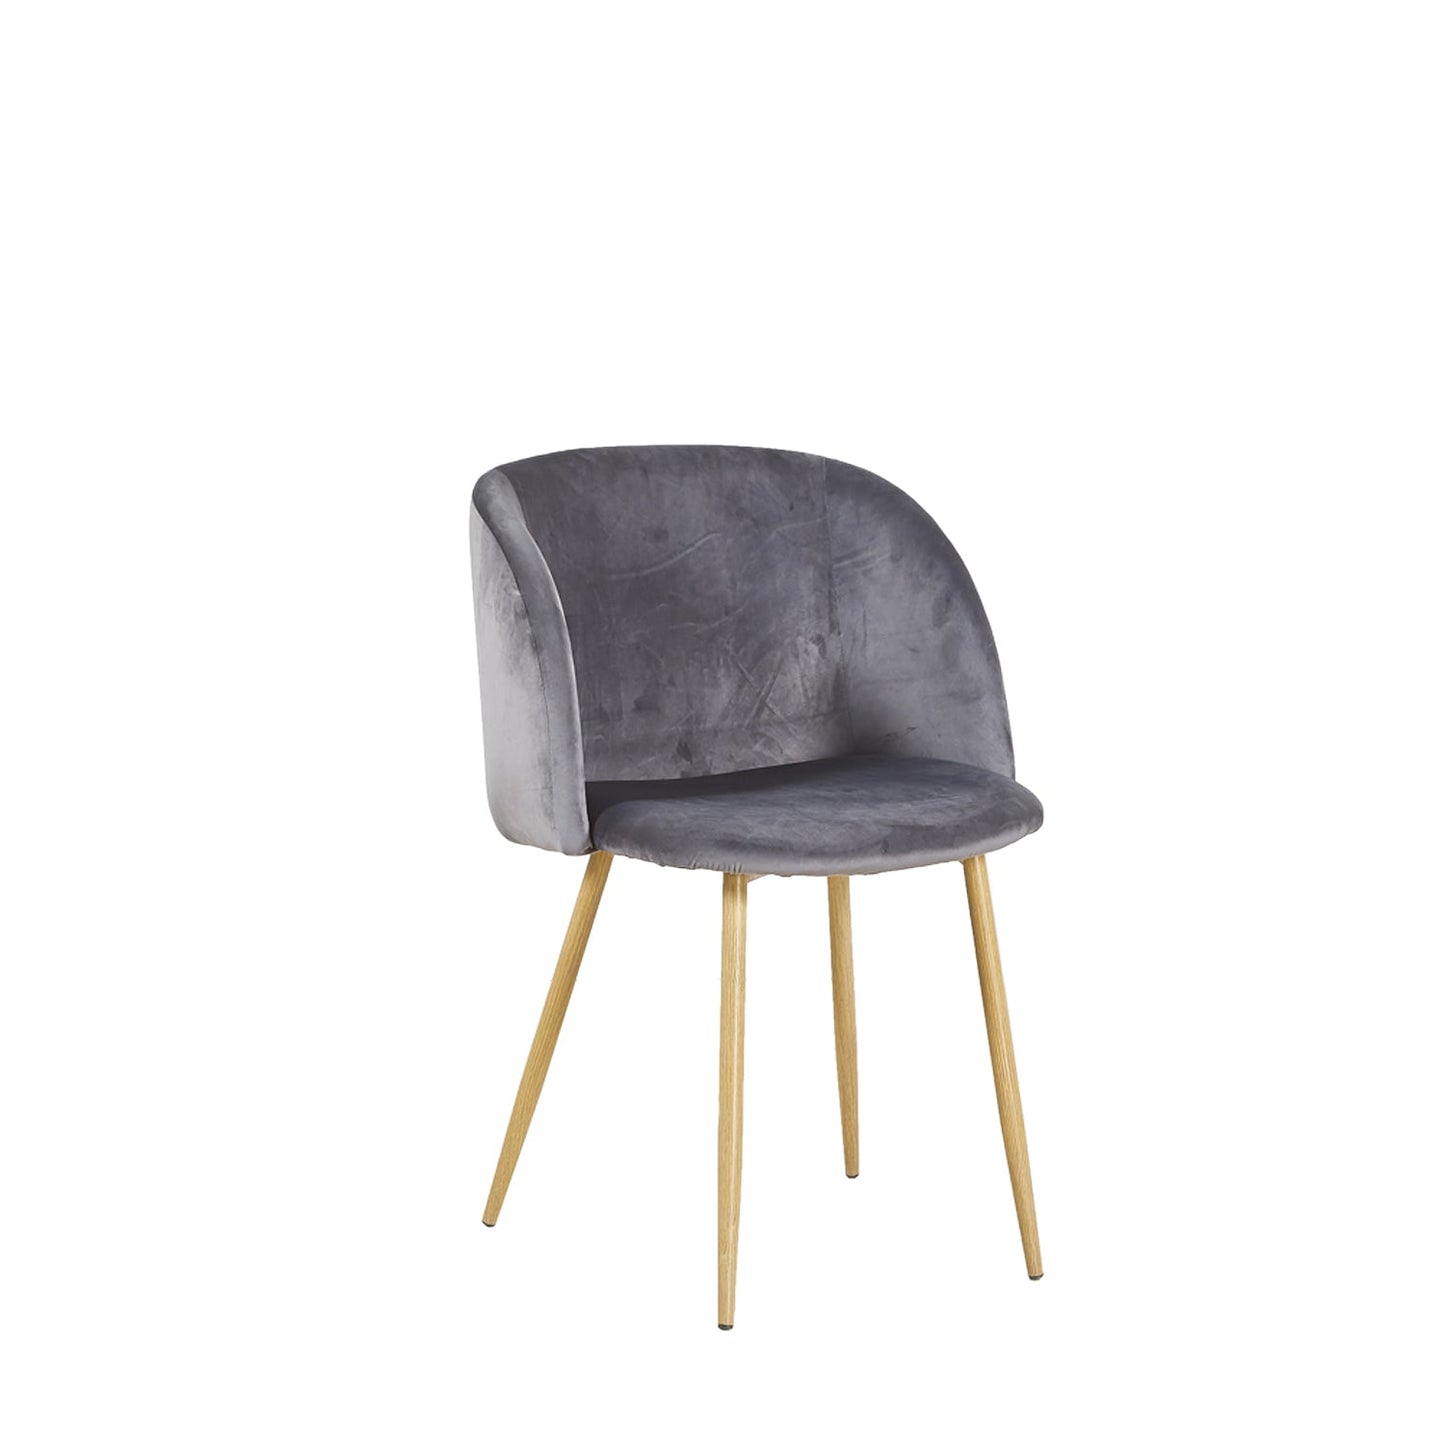 ALOE Velvet Dining Chair with Armrest and Metal Legs - Pink/Cactus/Blue/Grey